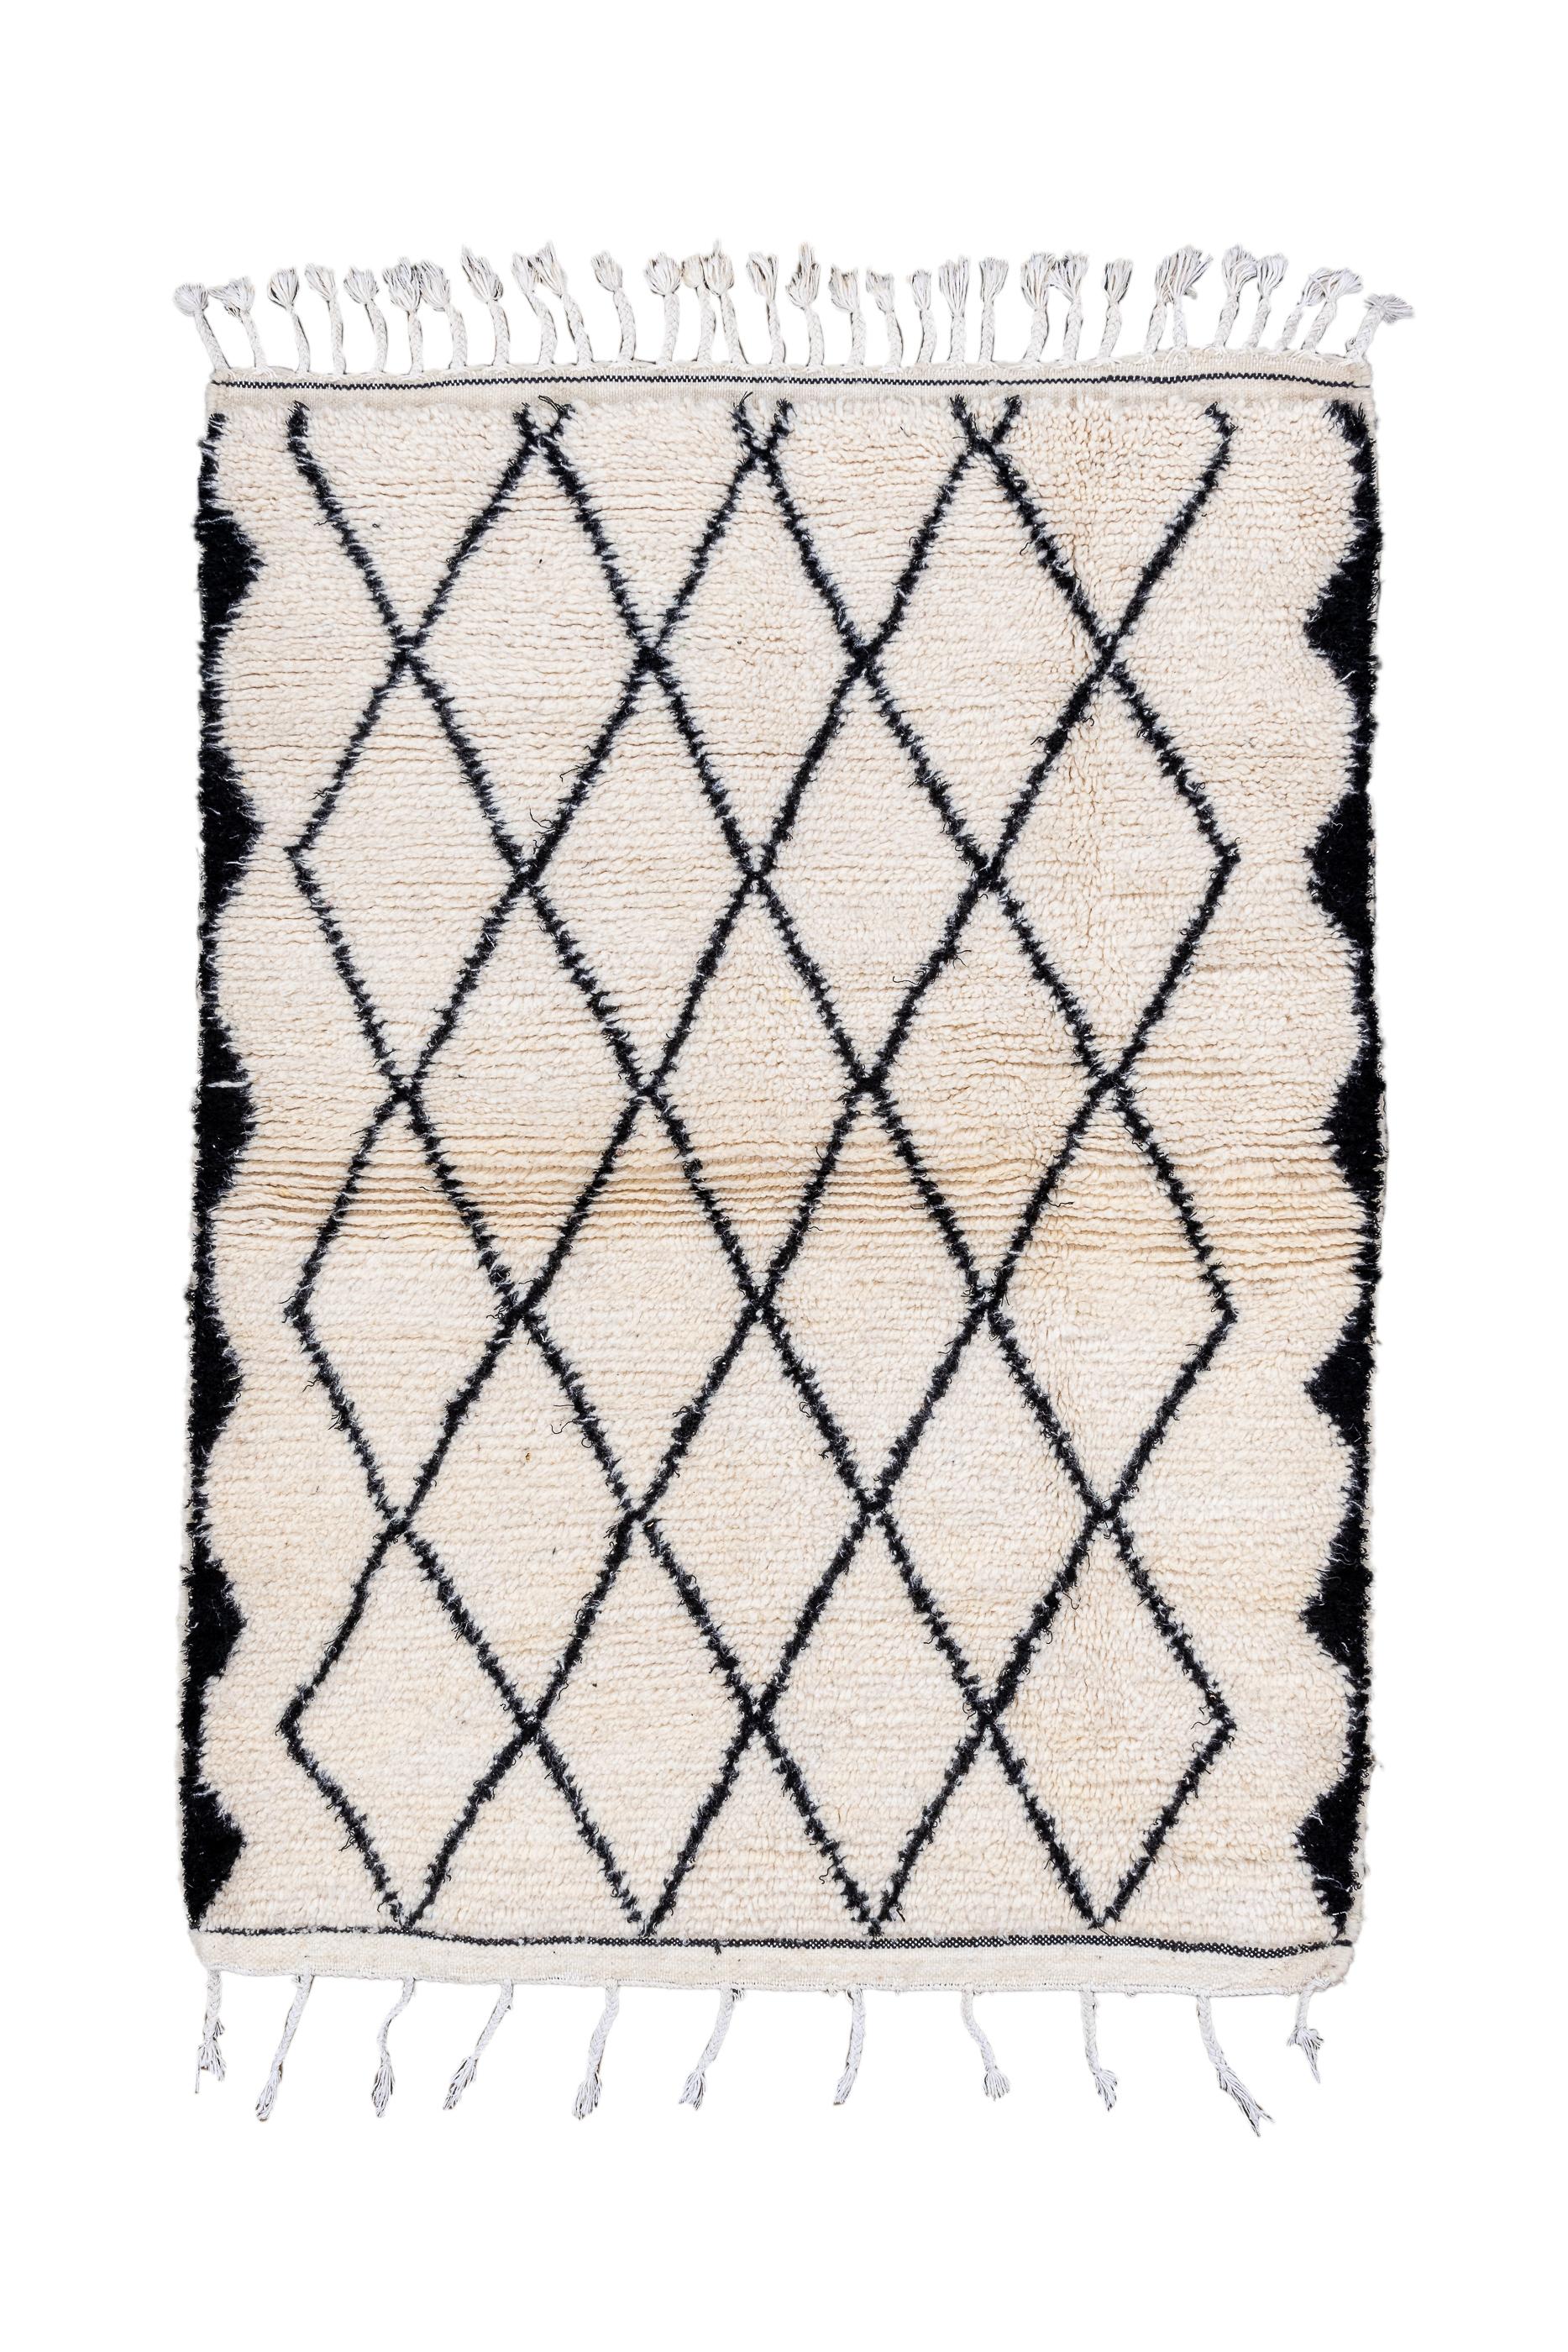 Moroccan weavers just love lozenges, as indicated here with an end to end charcoal lattice on an off-white natural wool. The charcoal side border are both flattened irregular triangle lines. Widely spaced tassels at one end, closer at the other.